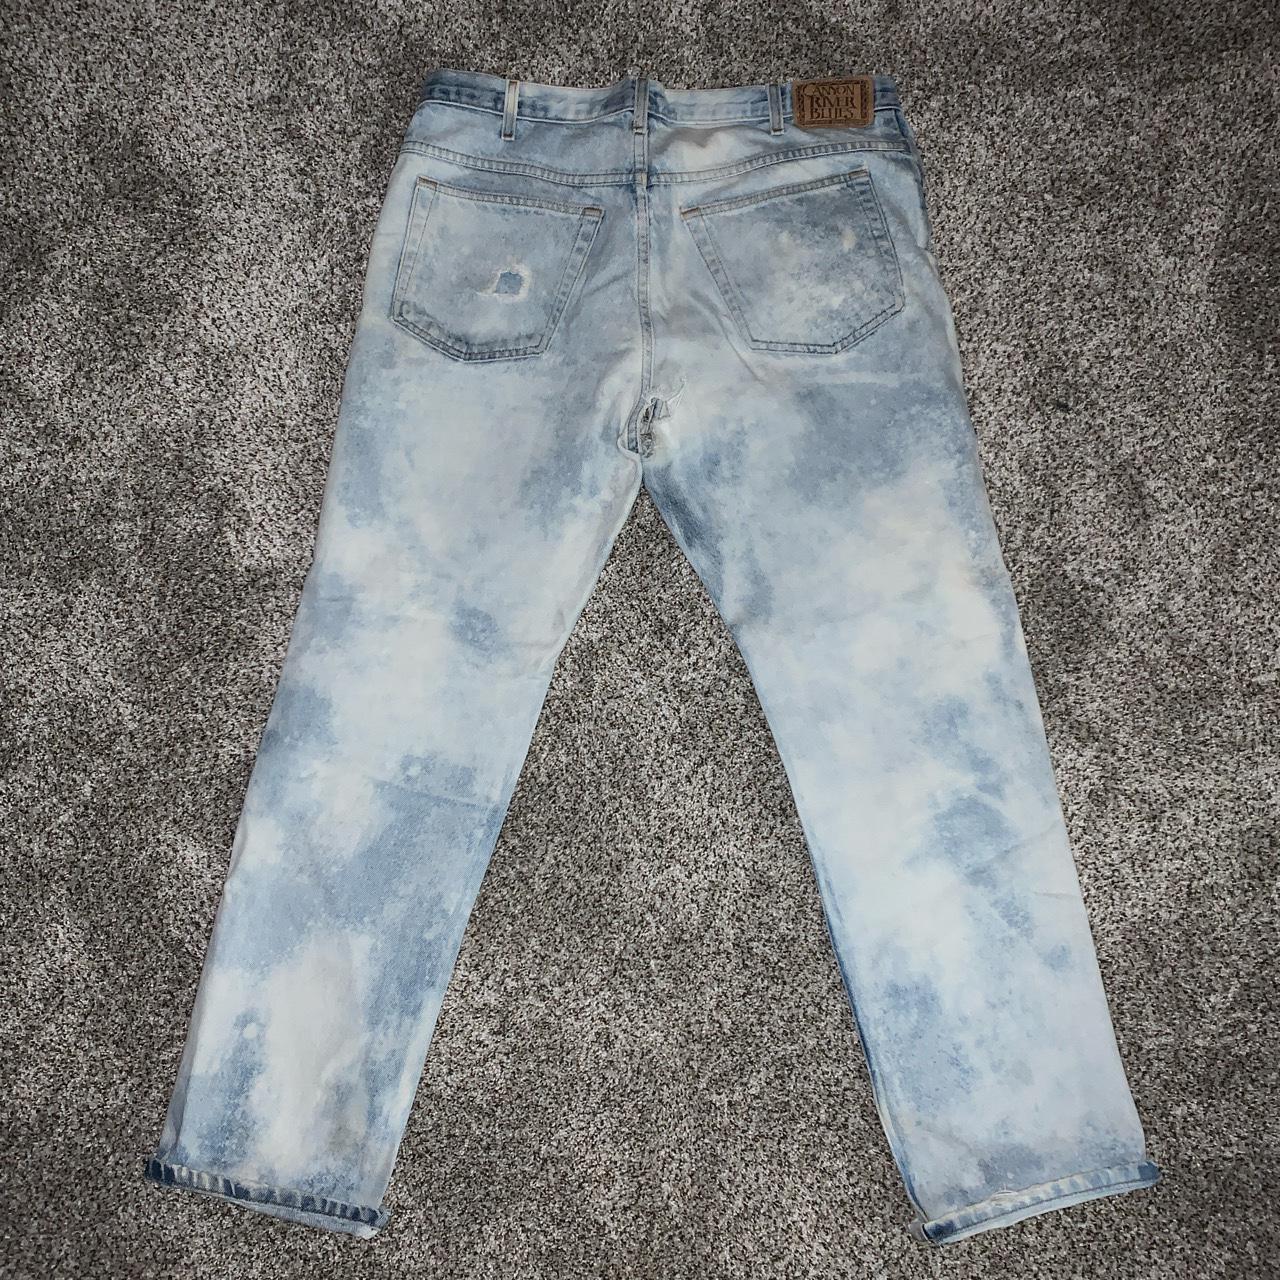 Canyon River Blues Men's Blue and White Jeans (3)